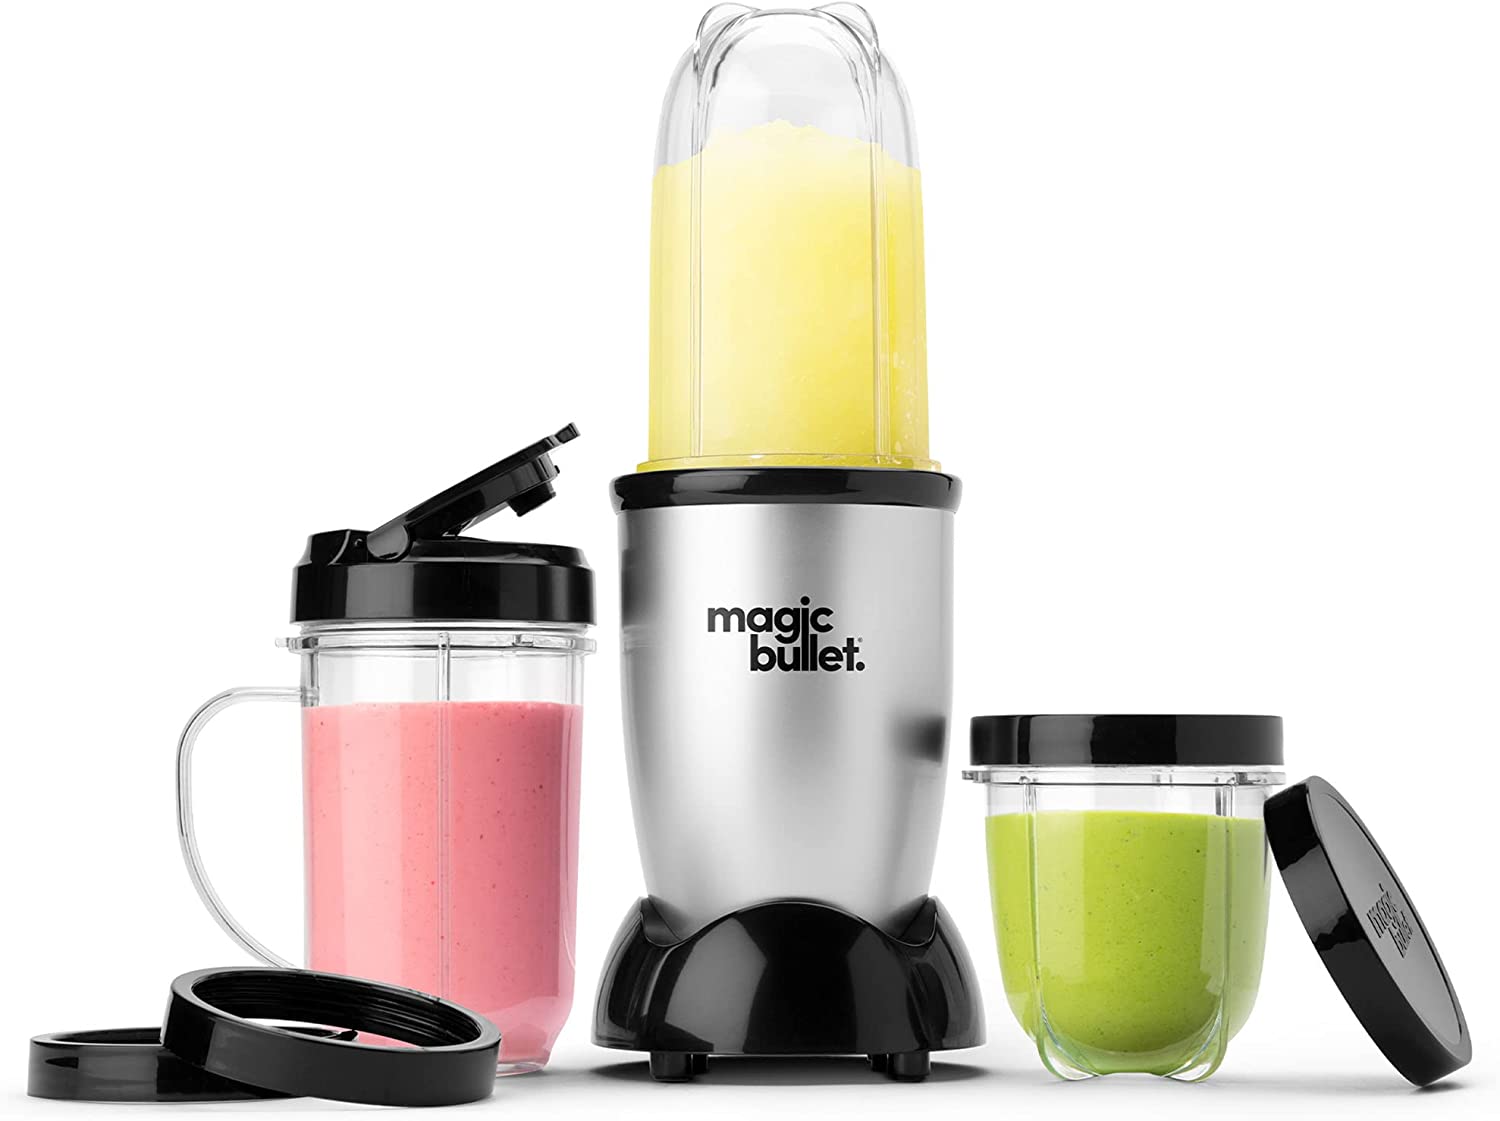 Household Blenders on Amazon.com at a great price